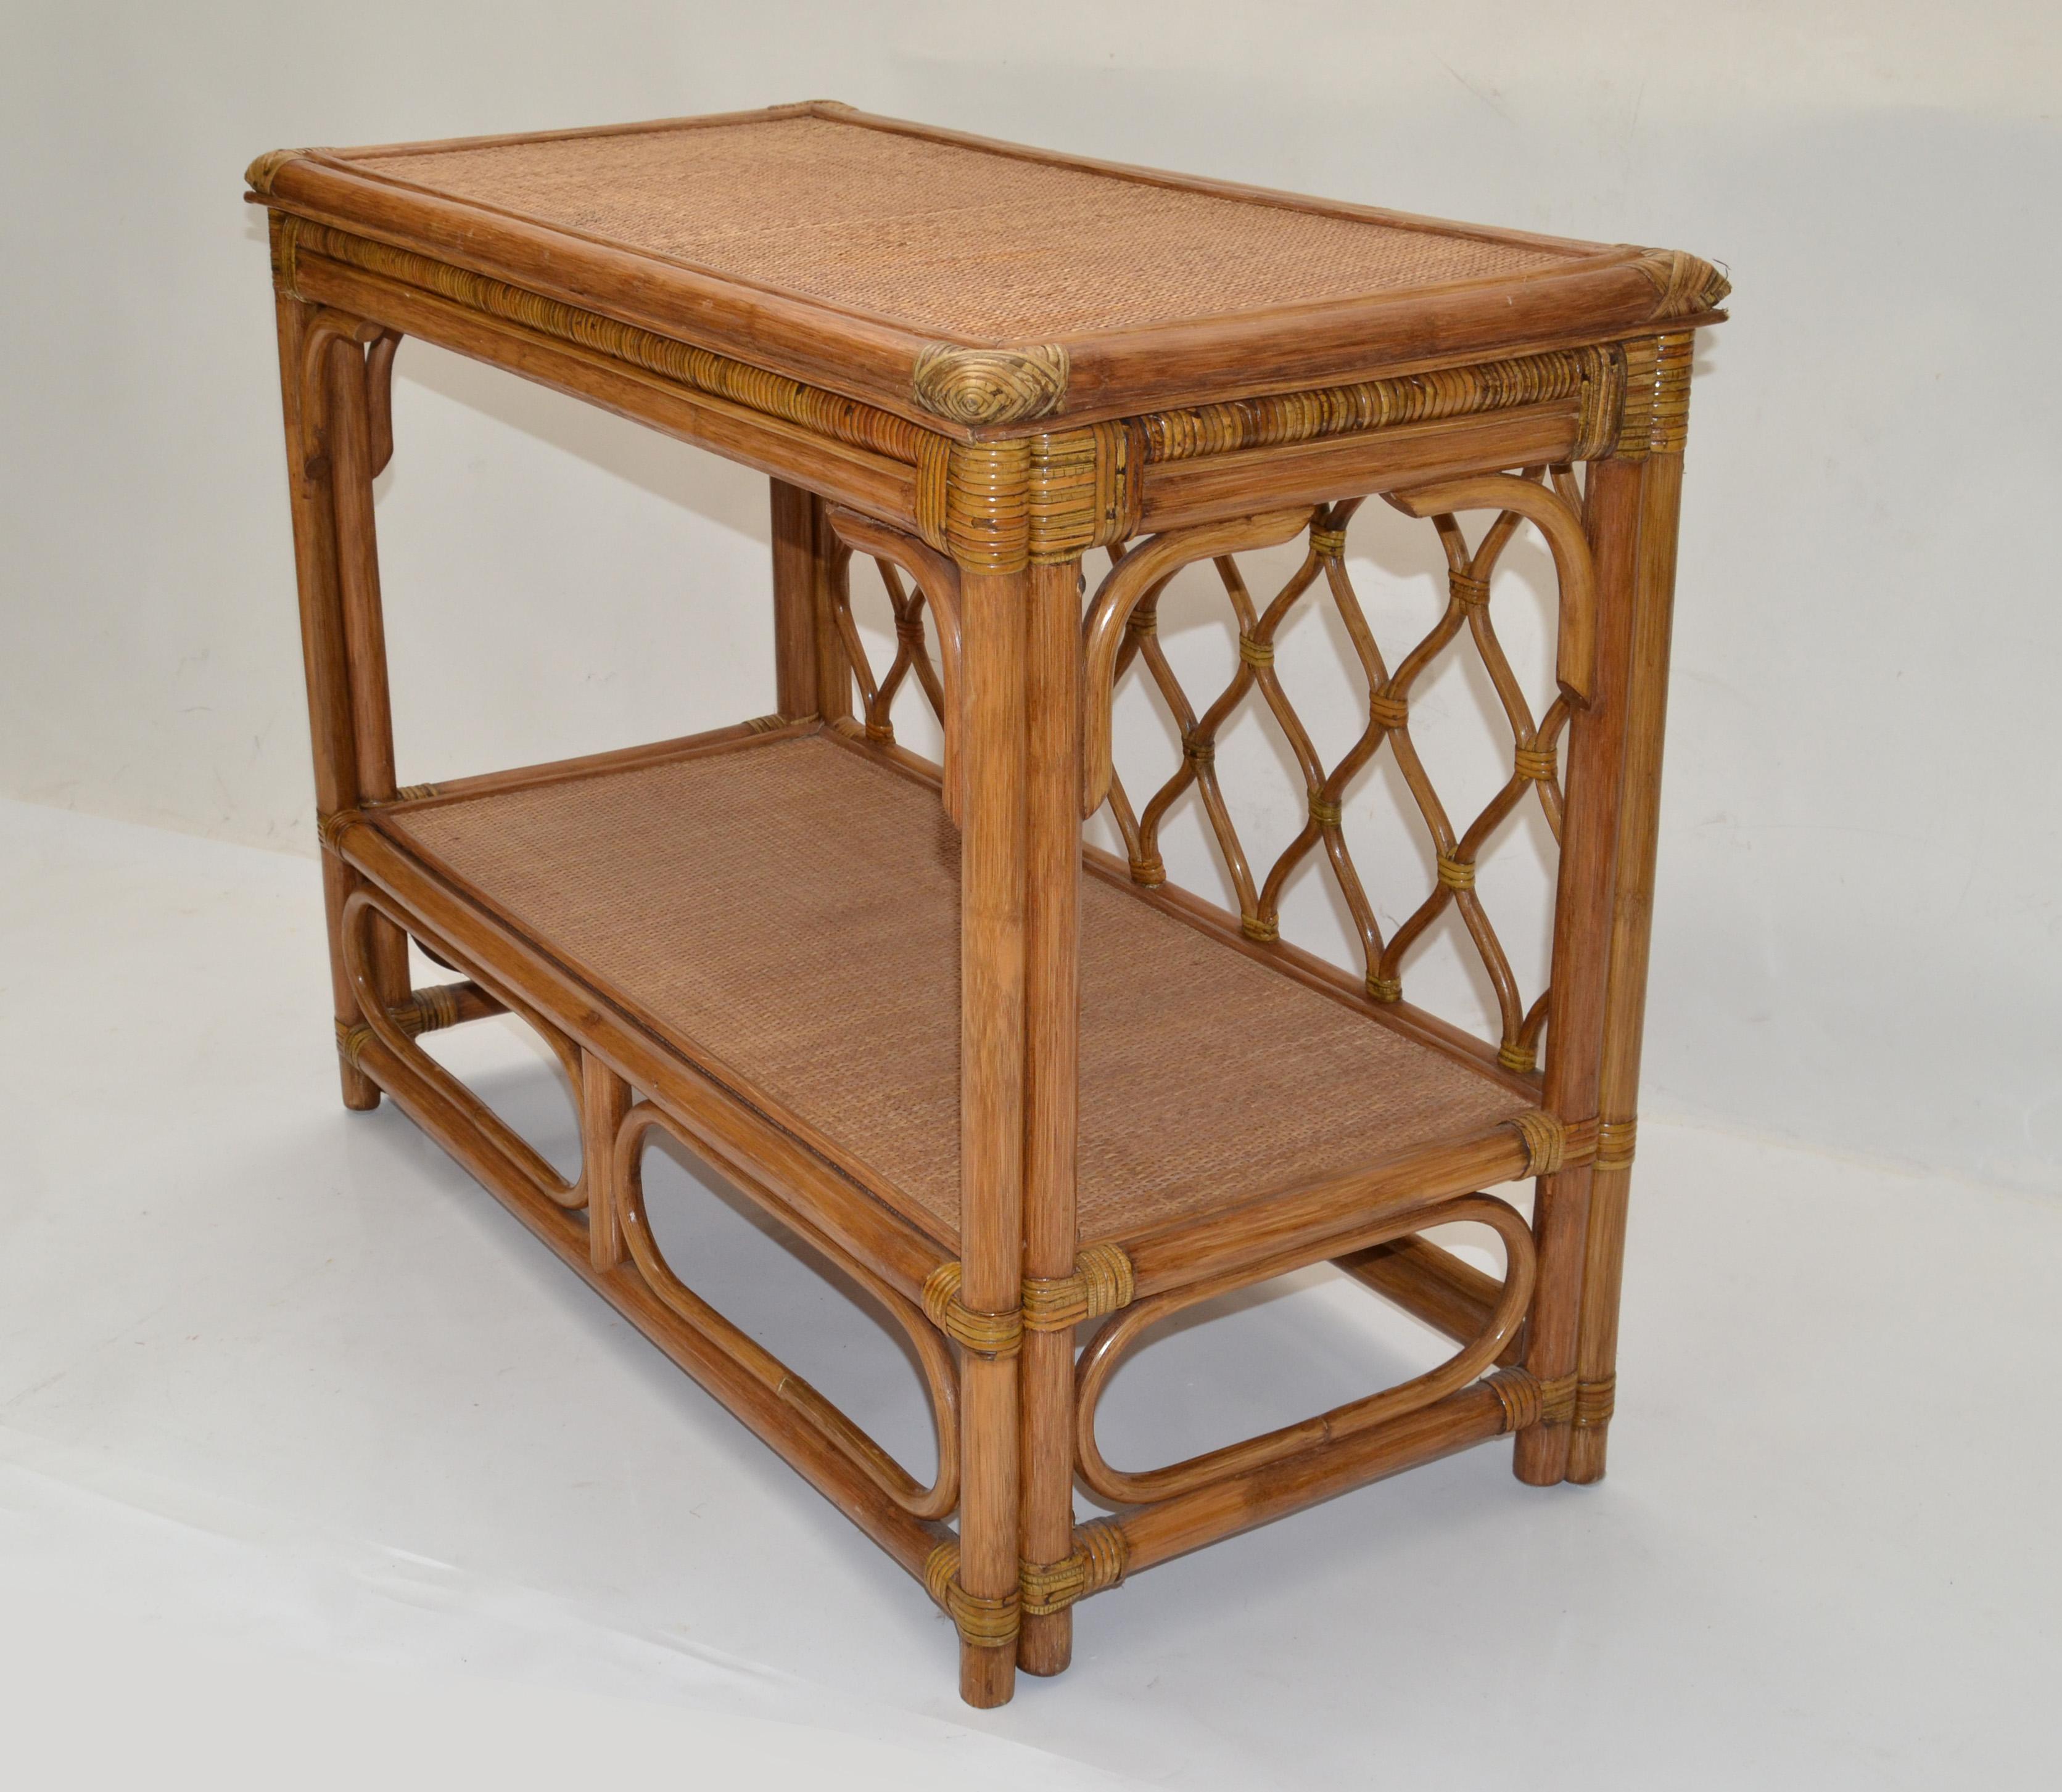 Mid-Century Modern Boho Chic rectangular bamboo Console with a handwoven Cane Top and bend Bamboo corners.
Useful as Dry Bar, Serving Table or storage shelf.
Great for your party room or wine cellar.